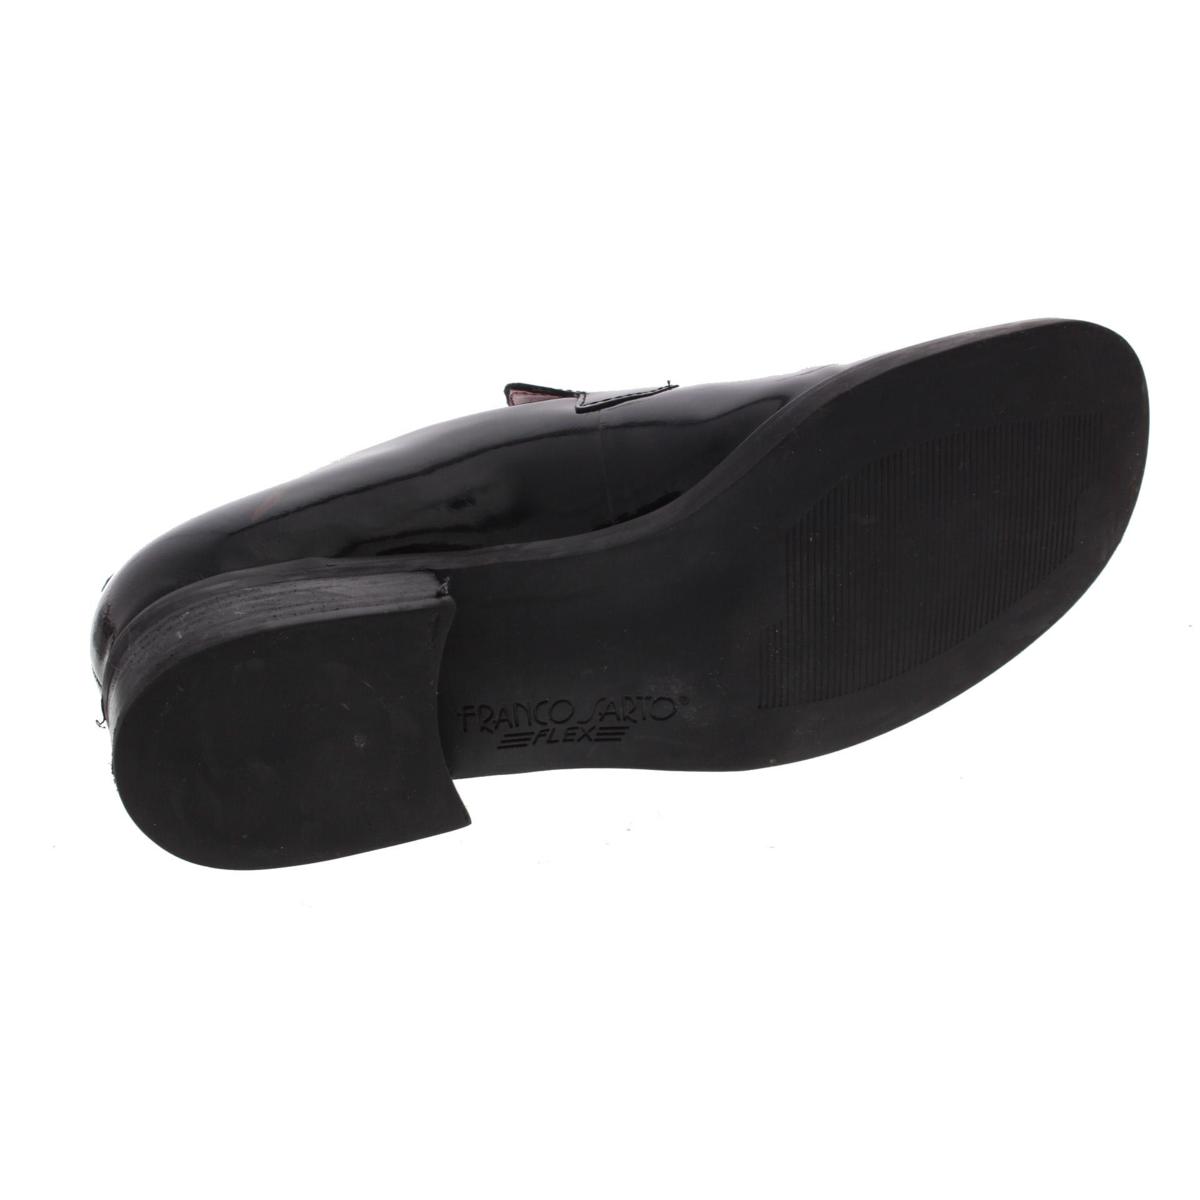 Franco Sarto Womens Bocca Slip On res Loafers BHFO 1317 for sale online